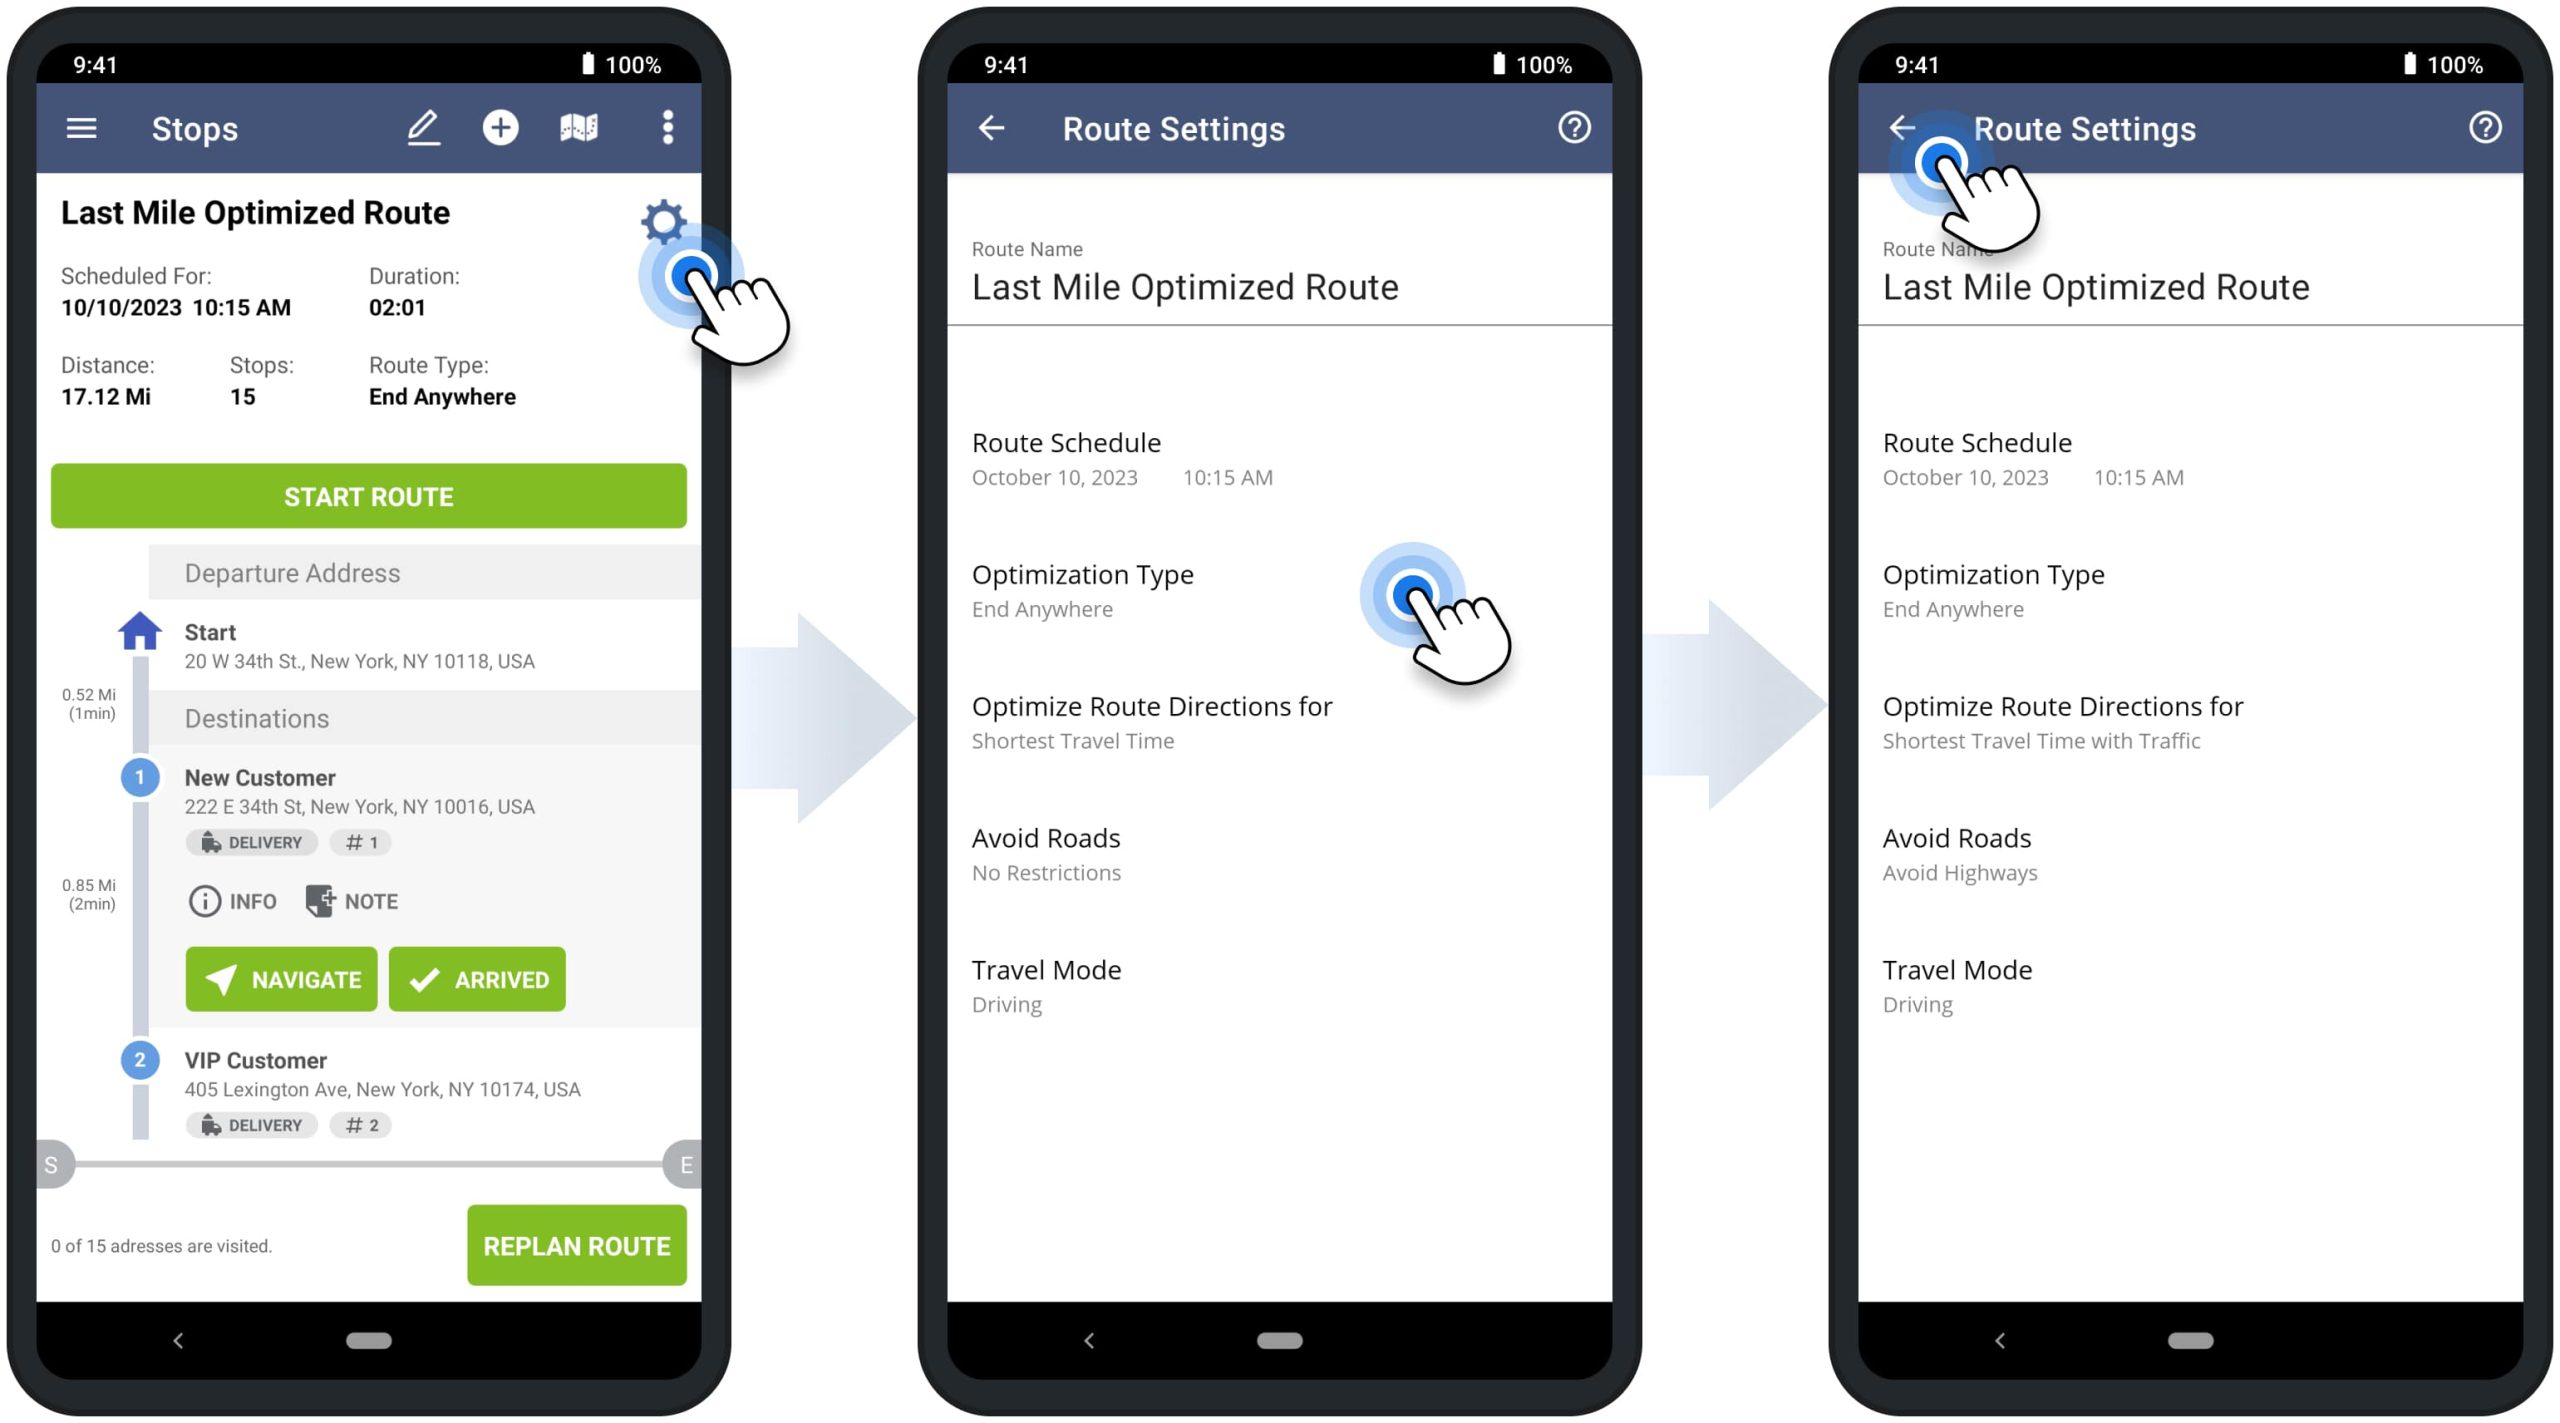 Adjusting route optimization, schedule, and other route settings on Route4Me's mobile driver route planning app.